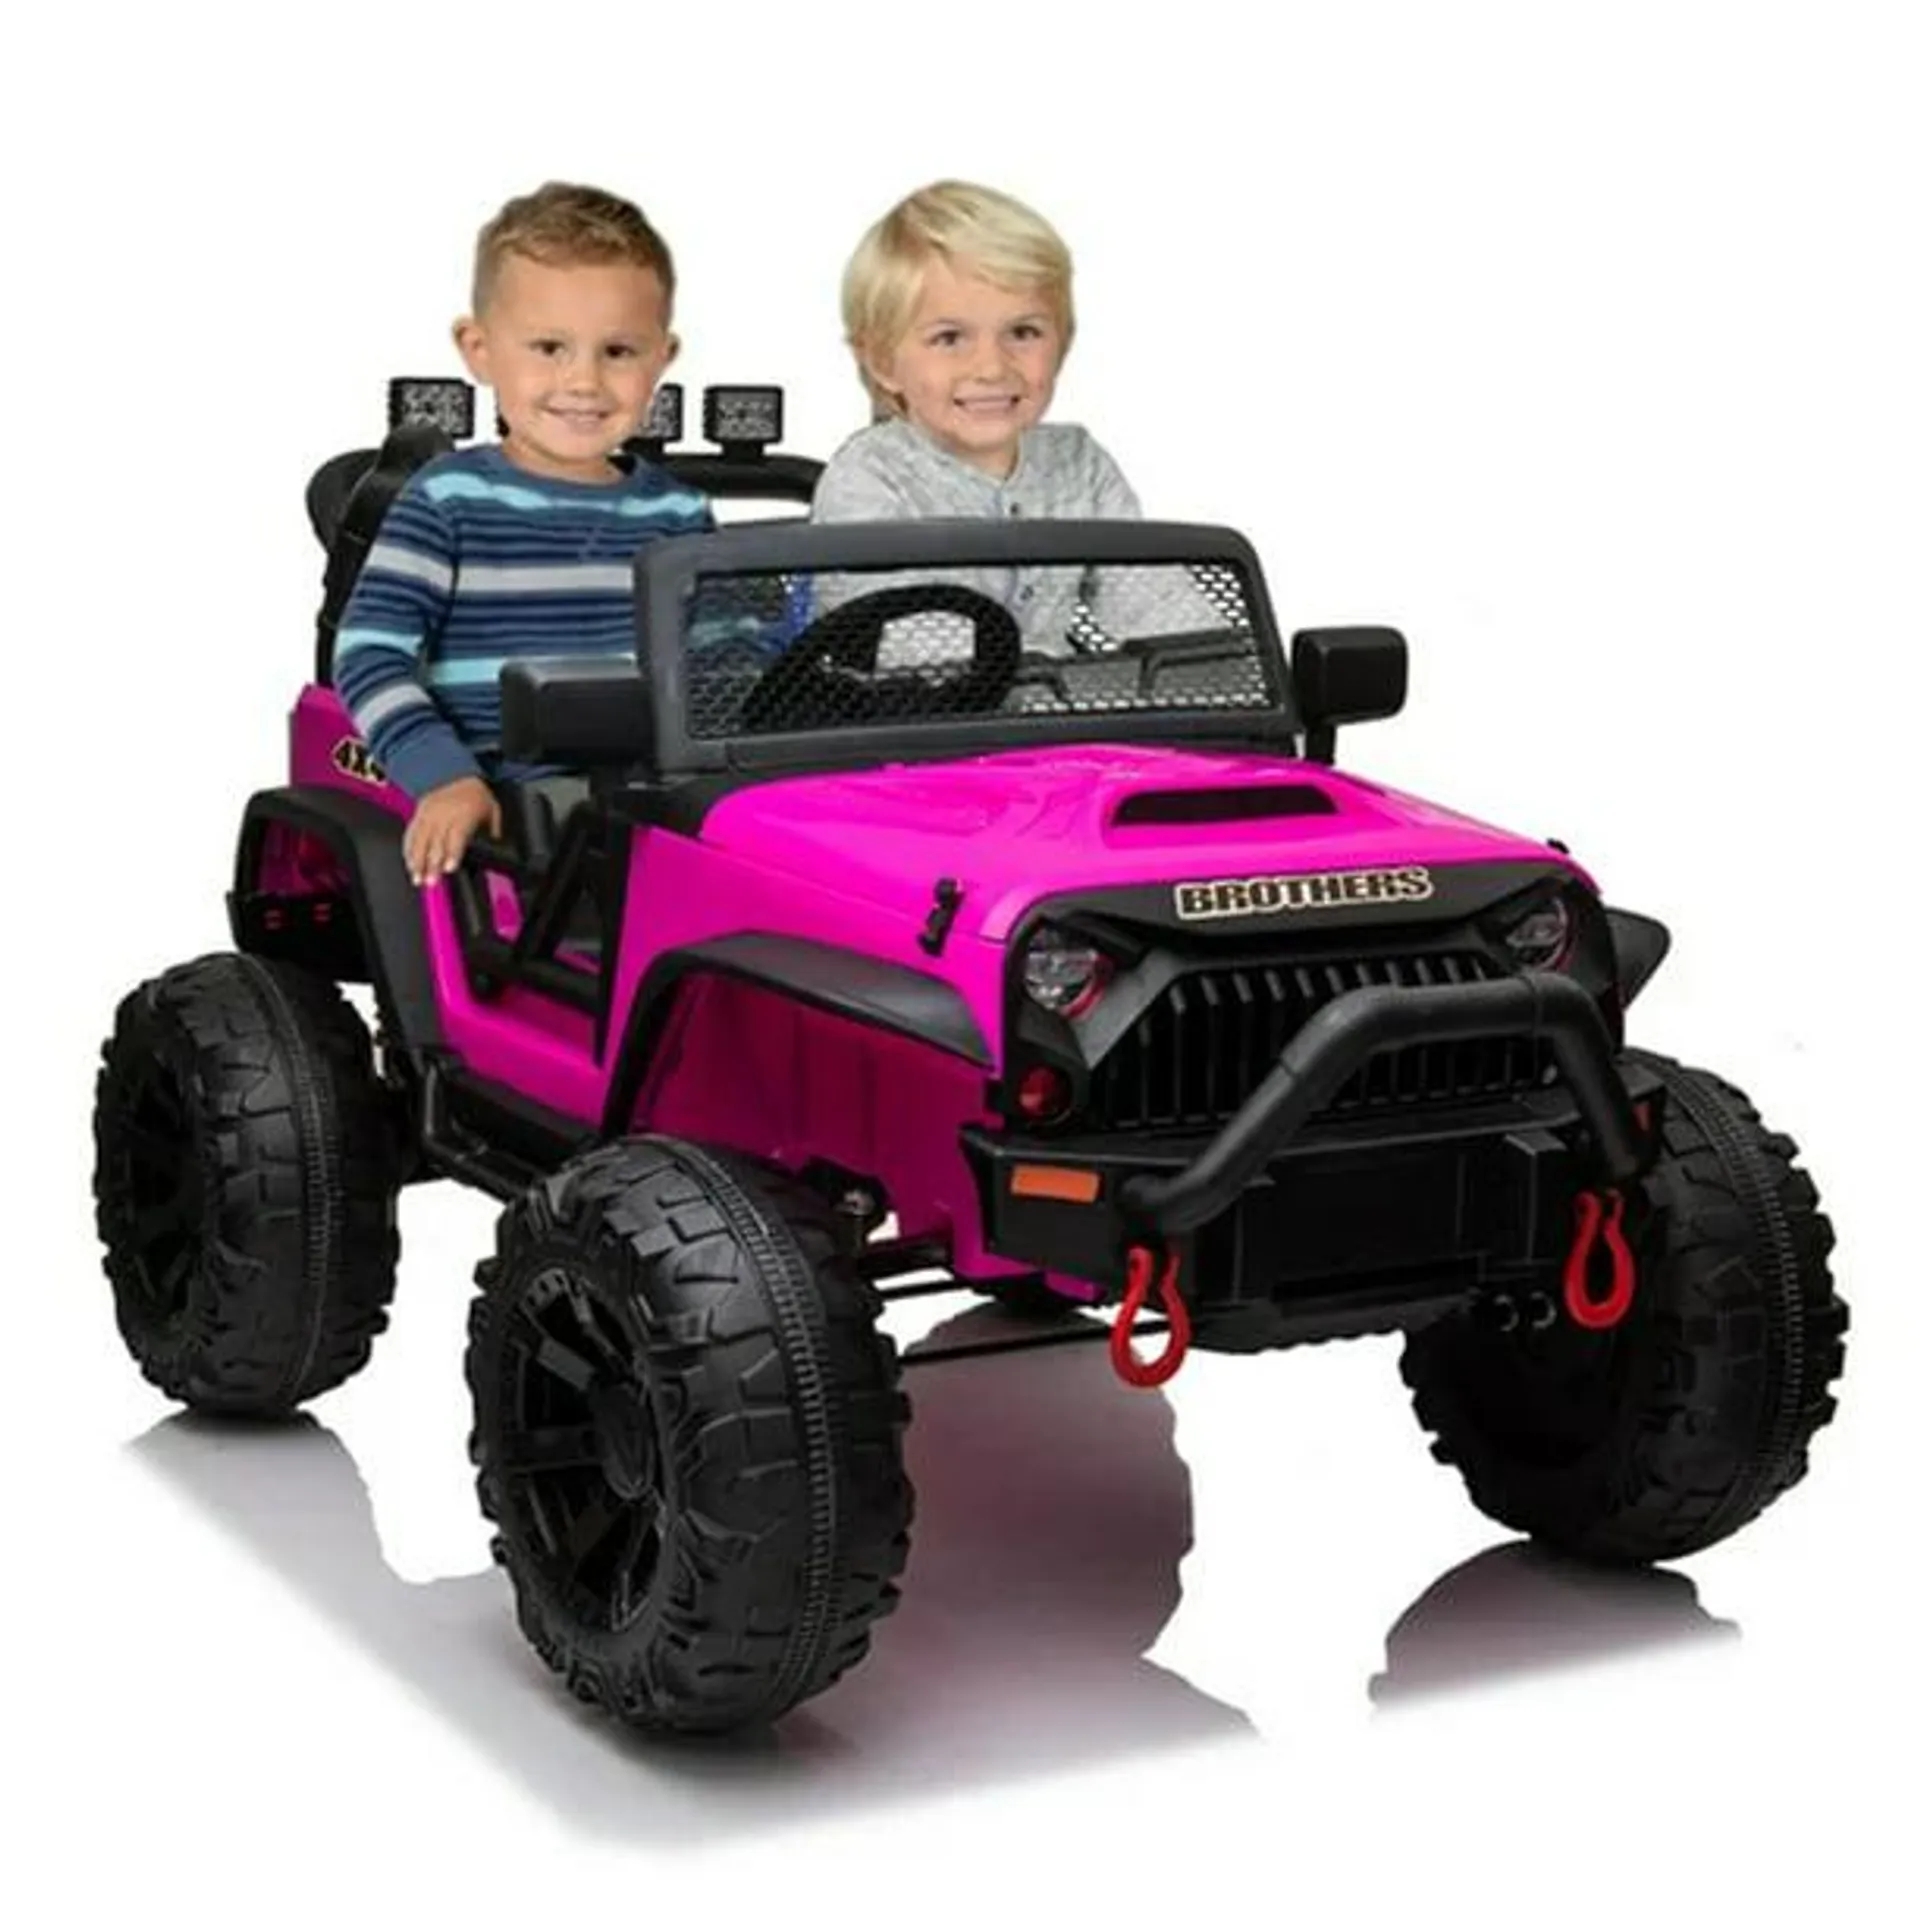 Two (2) Seater Large Ride On Car for kids,KidsCar with Remote Control,Large 12V Battery Powered Electric Car to Drive 3 Speeds, Toddler Car,Kids car with LED Lights,Music,Bluetooth,Rose Red